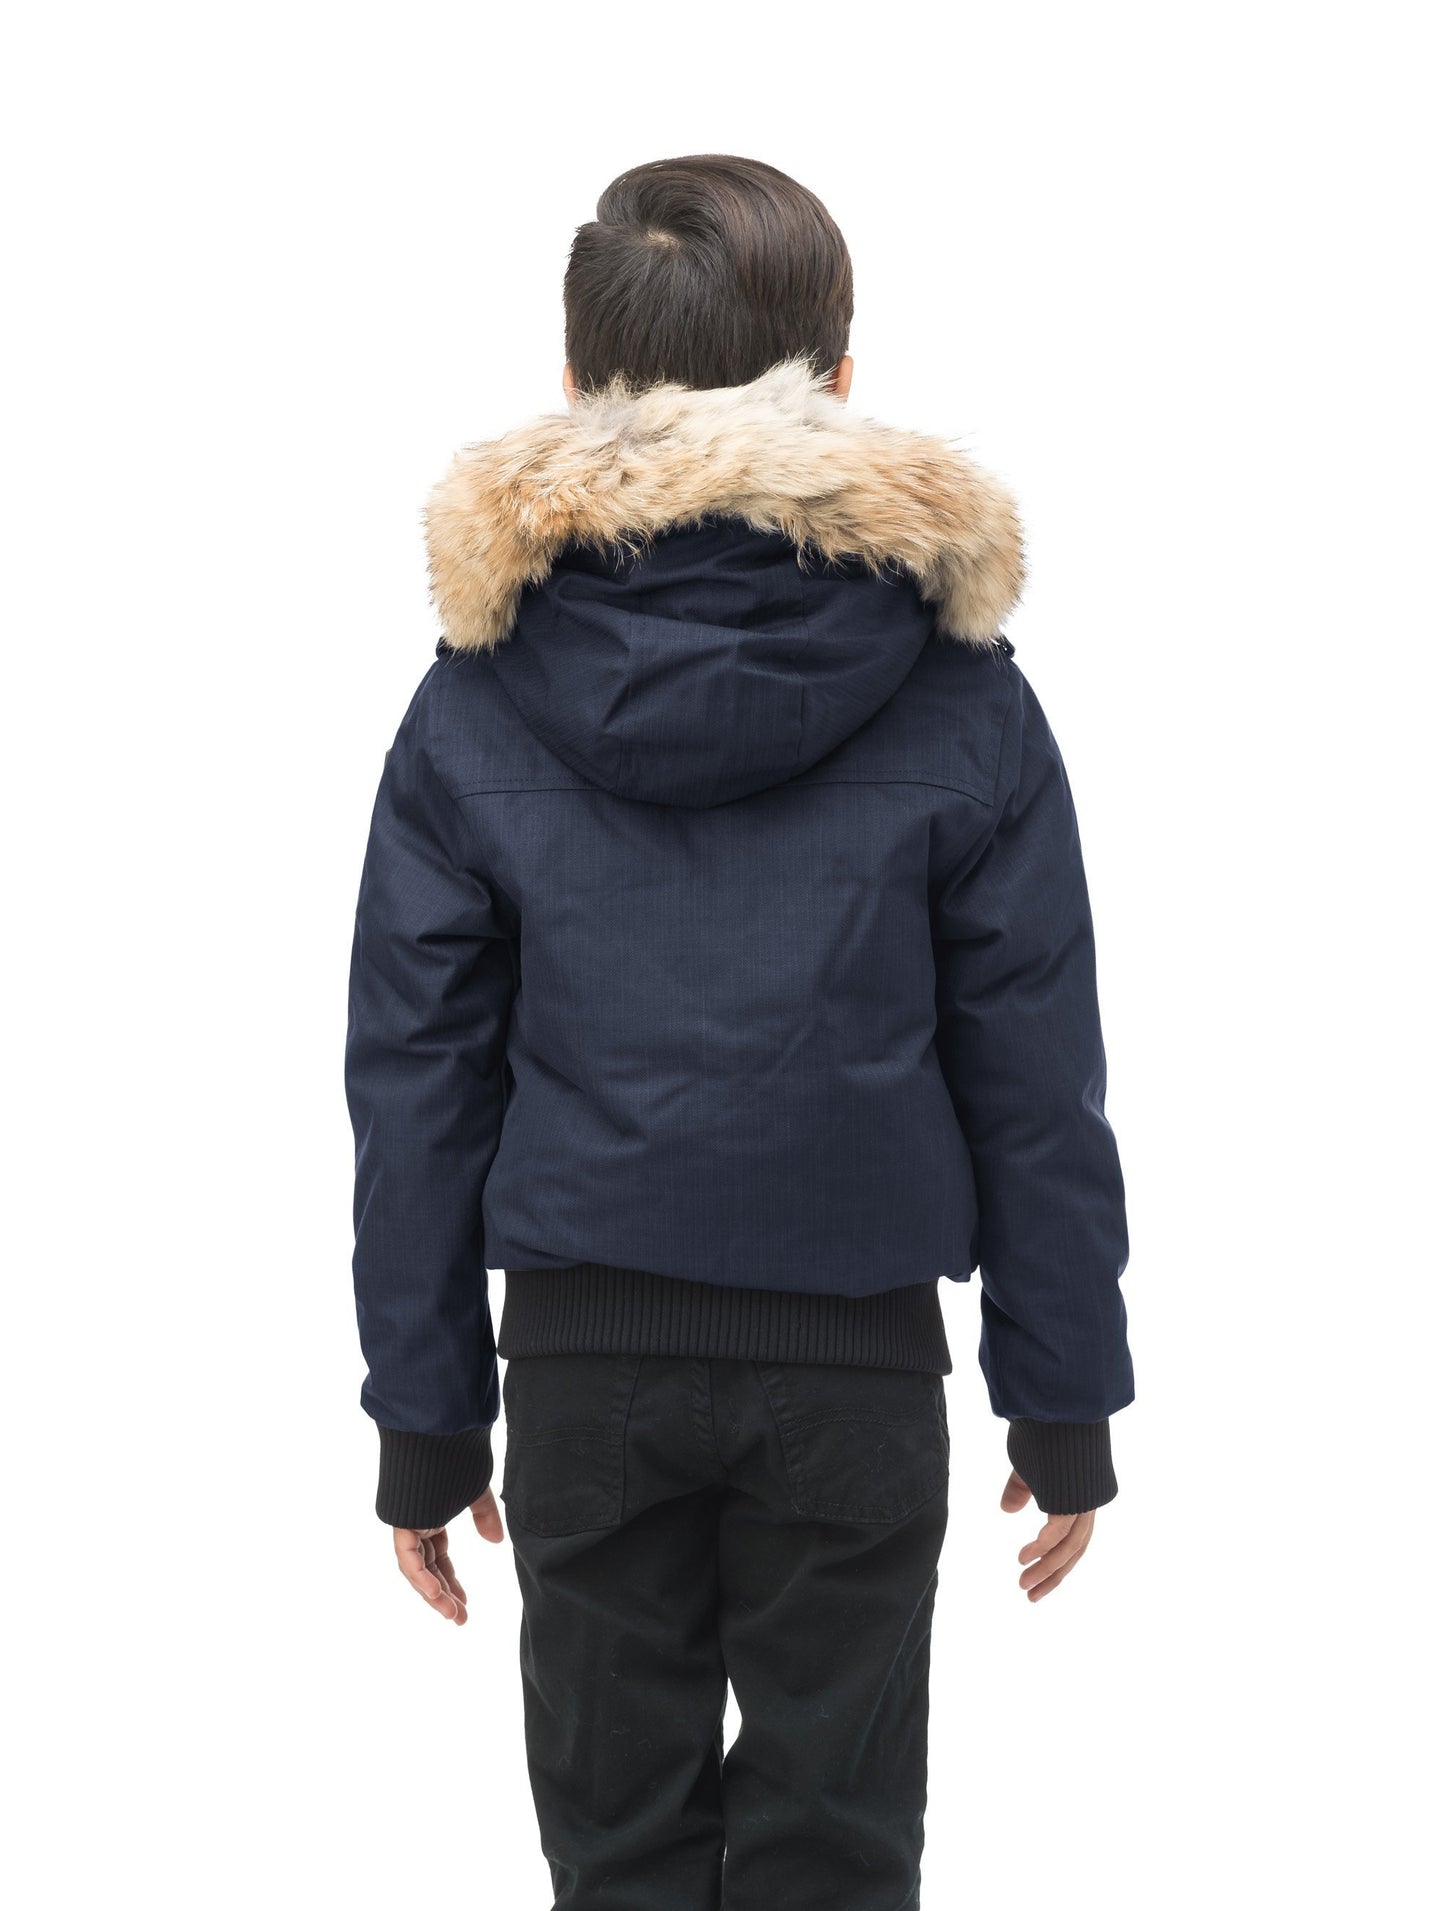 Kid's waist length down bomber jacket with fur trim hood in CH Navy